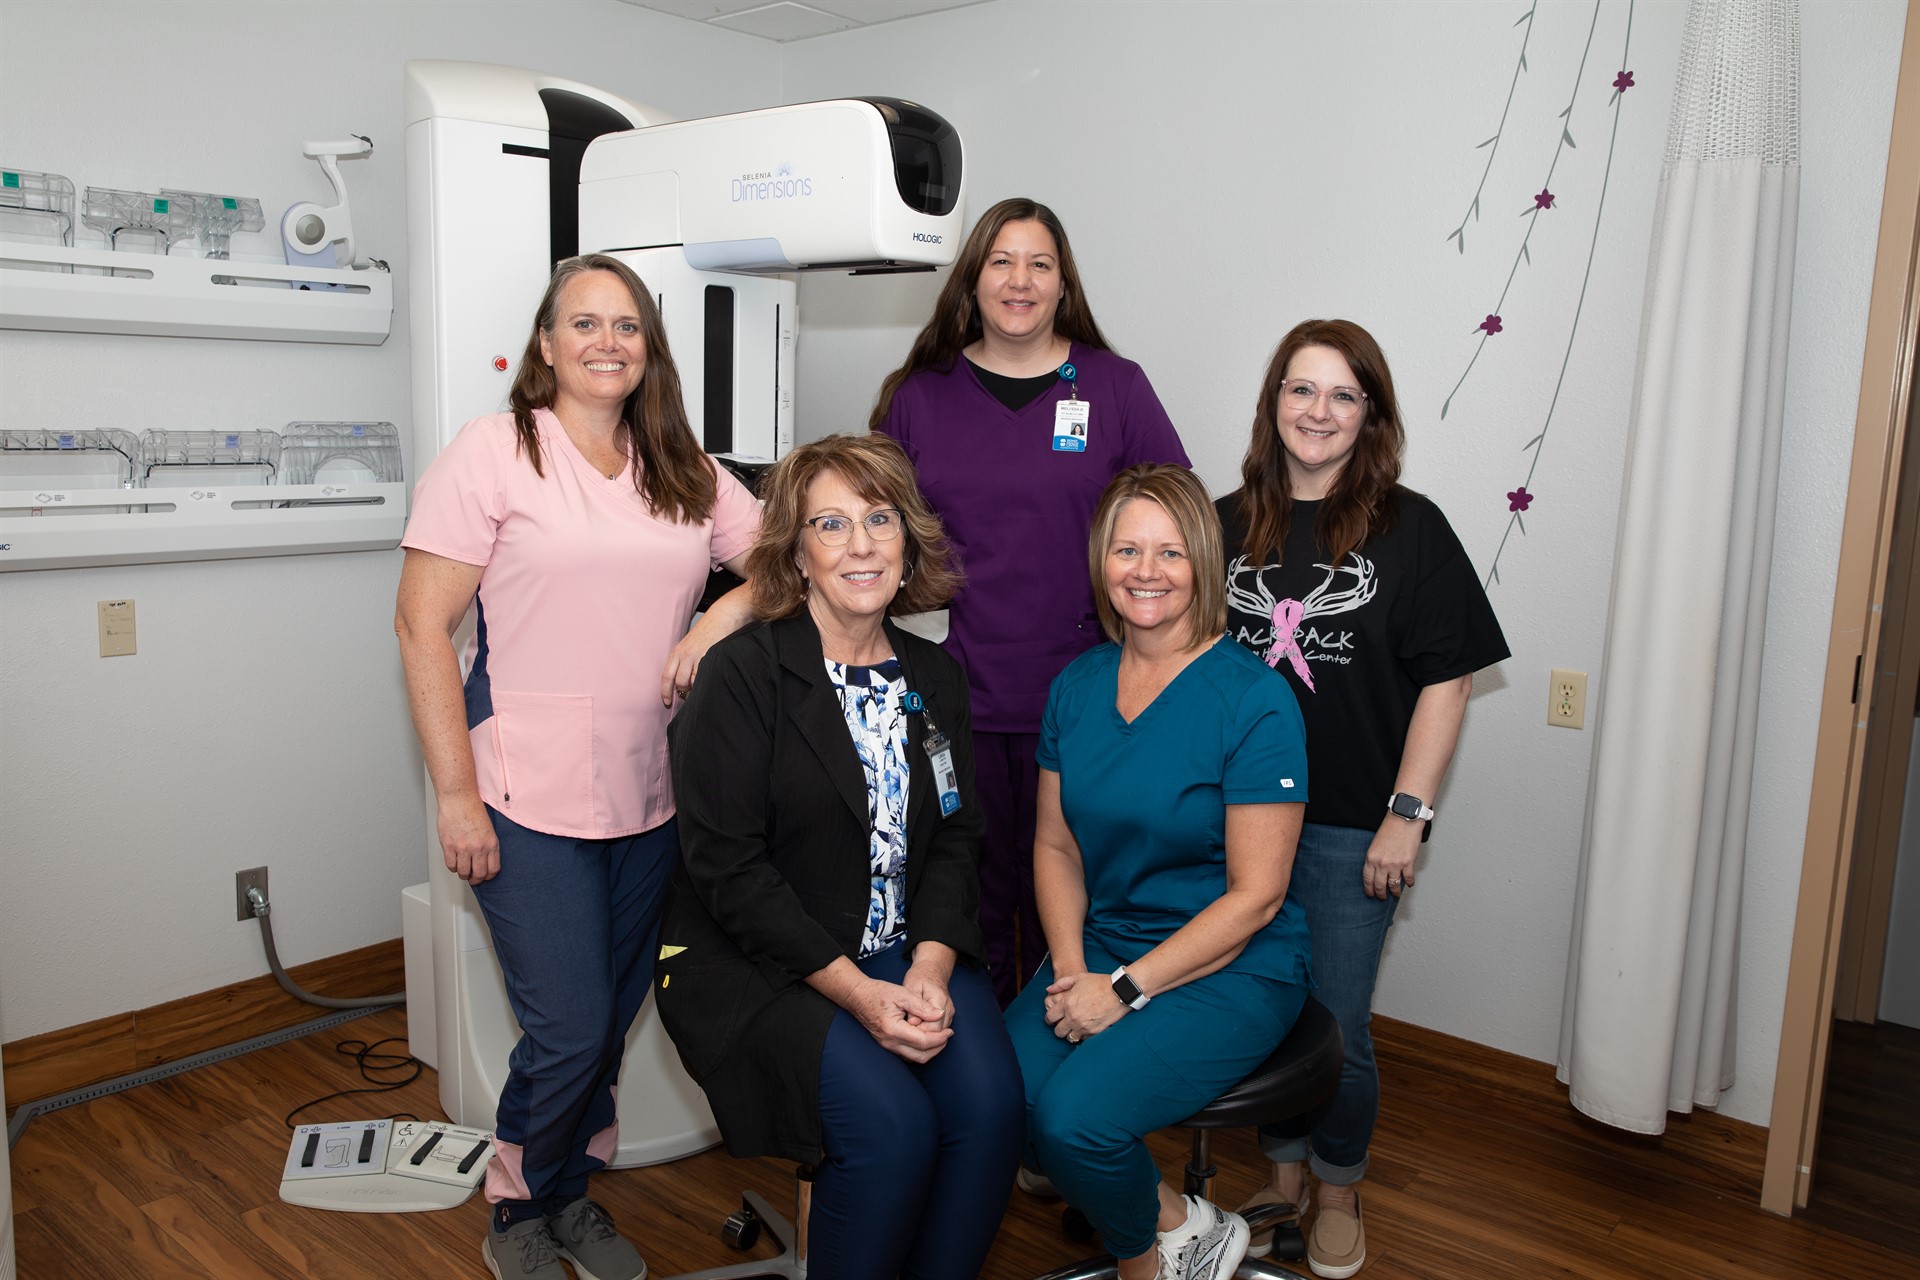 Early detection important for breast health